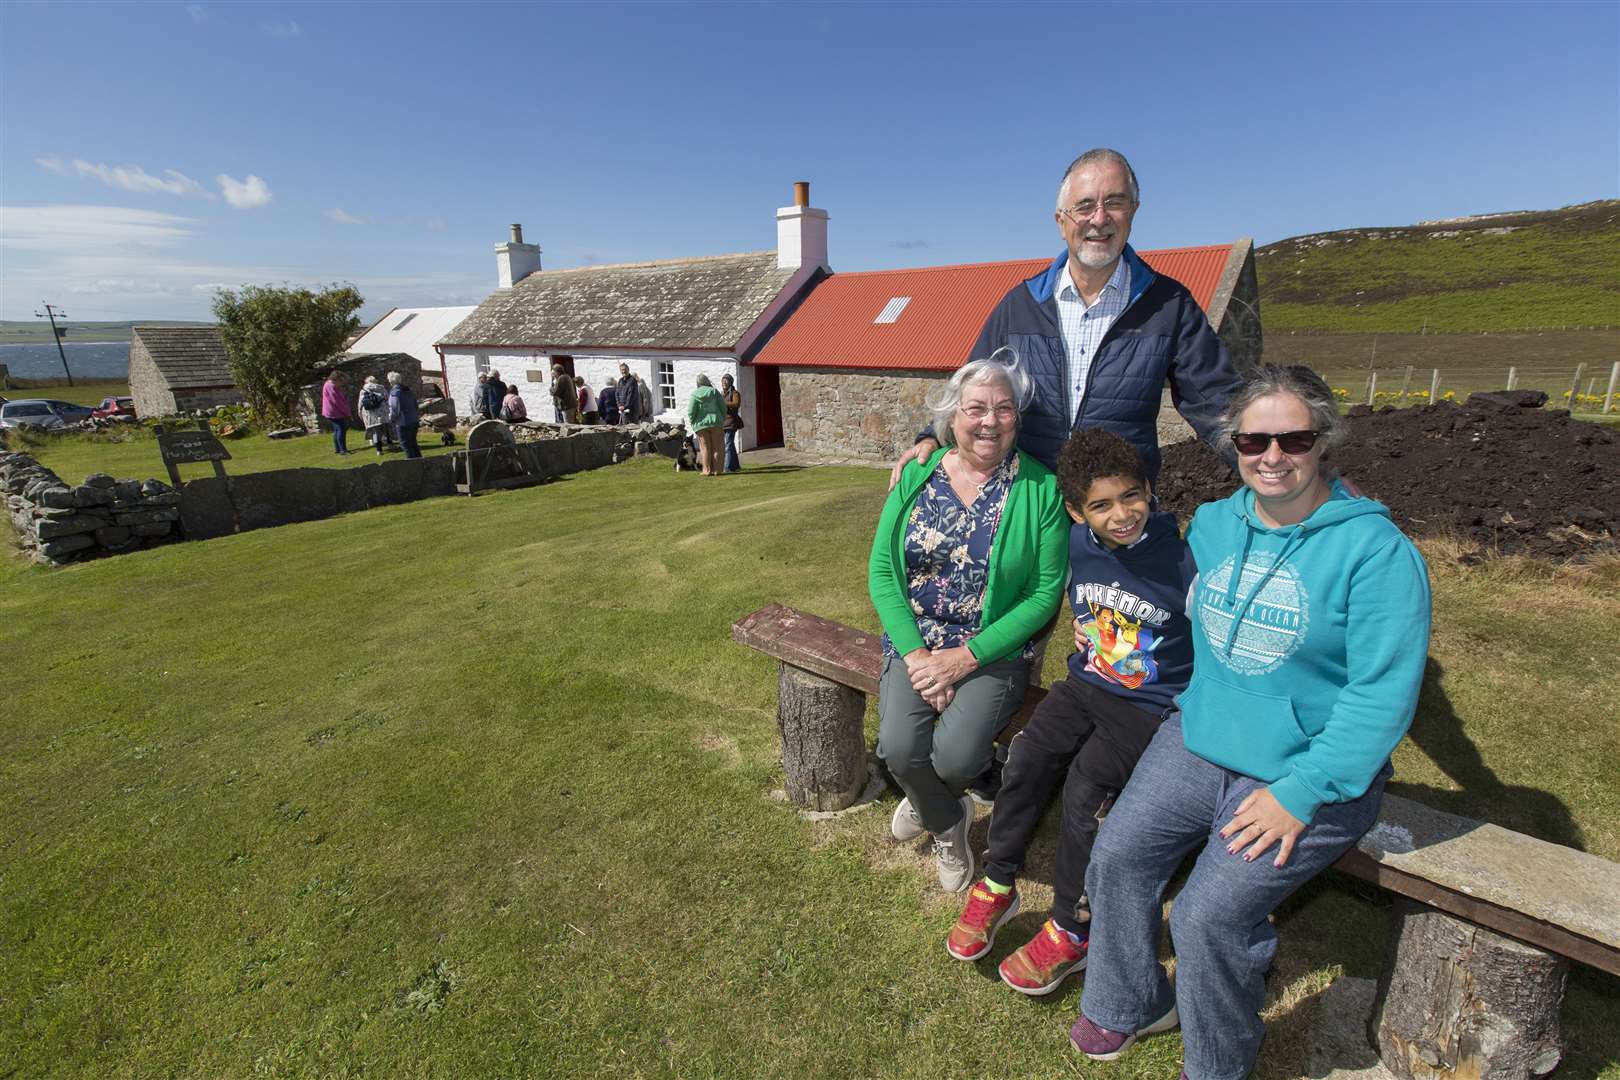 Members of the Fitzsimmons family – Anne, Charlie, Claire and Jim – with Mary Ann's Cottage in the background. Picture: Robert MacDonald / Northern Studios